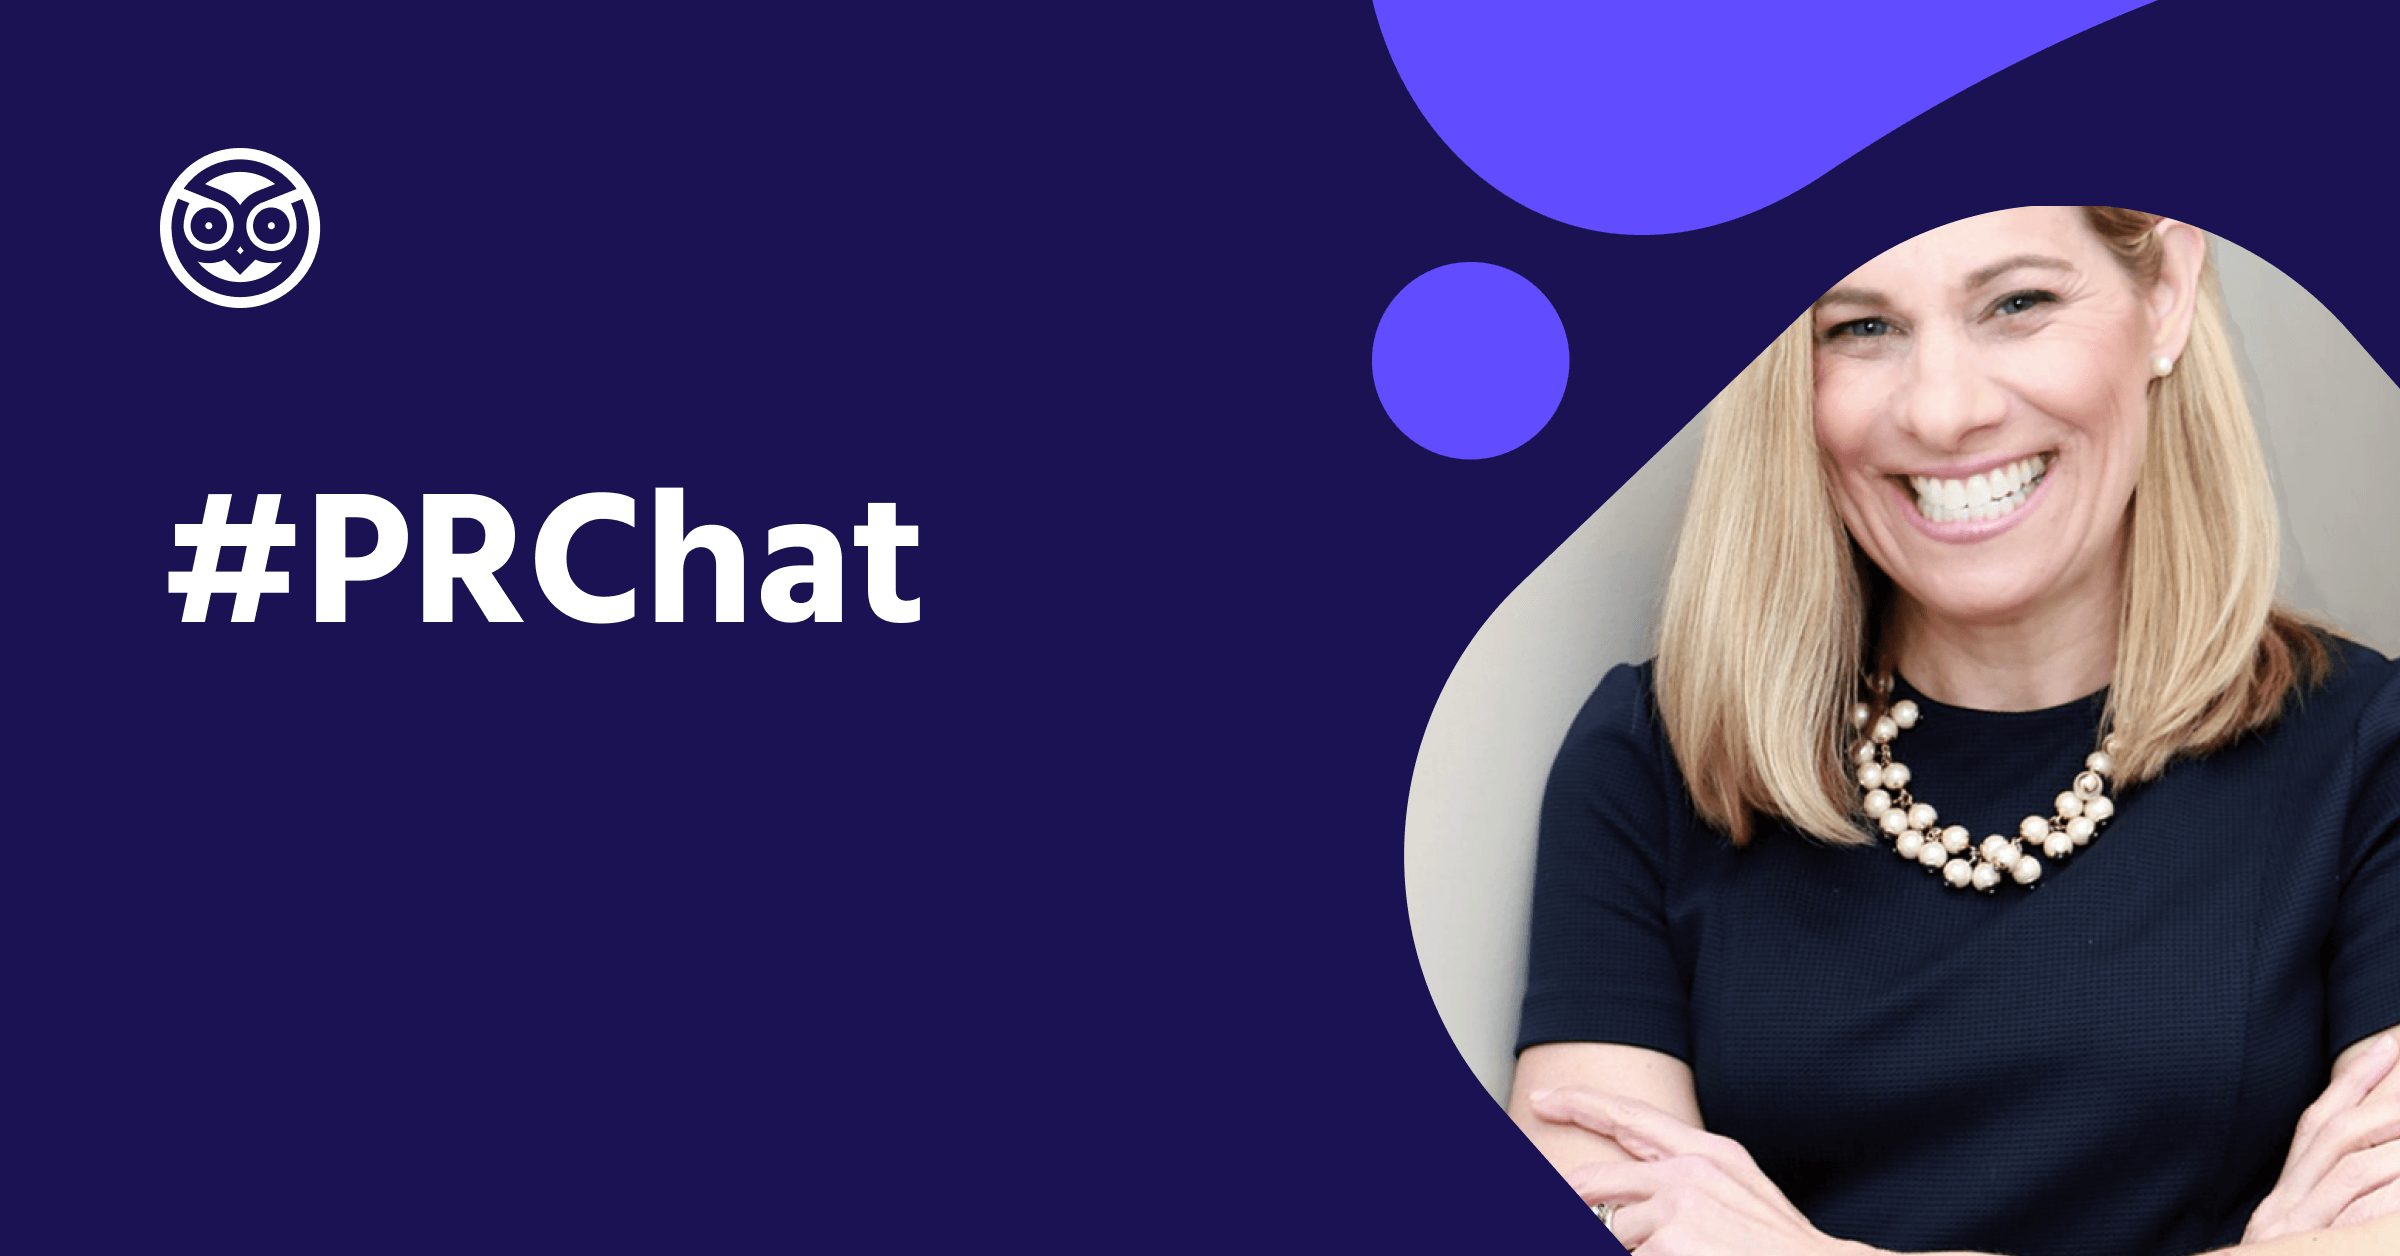 Prowly #PRChat with Jennifer McGinley, CEO at JLM Strategic Communications